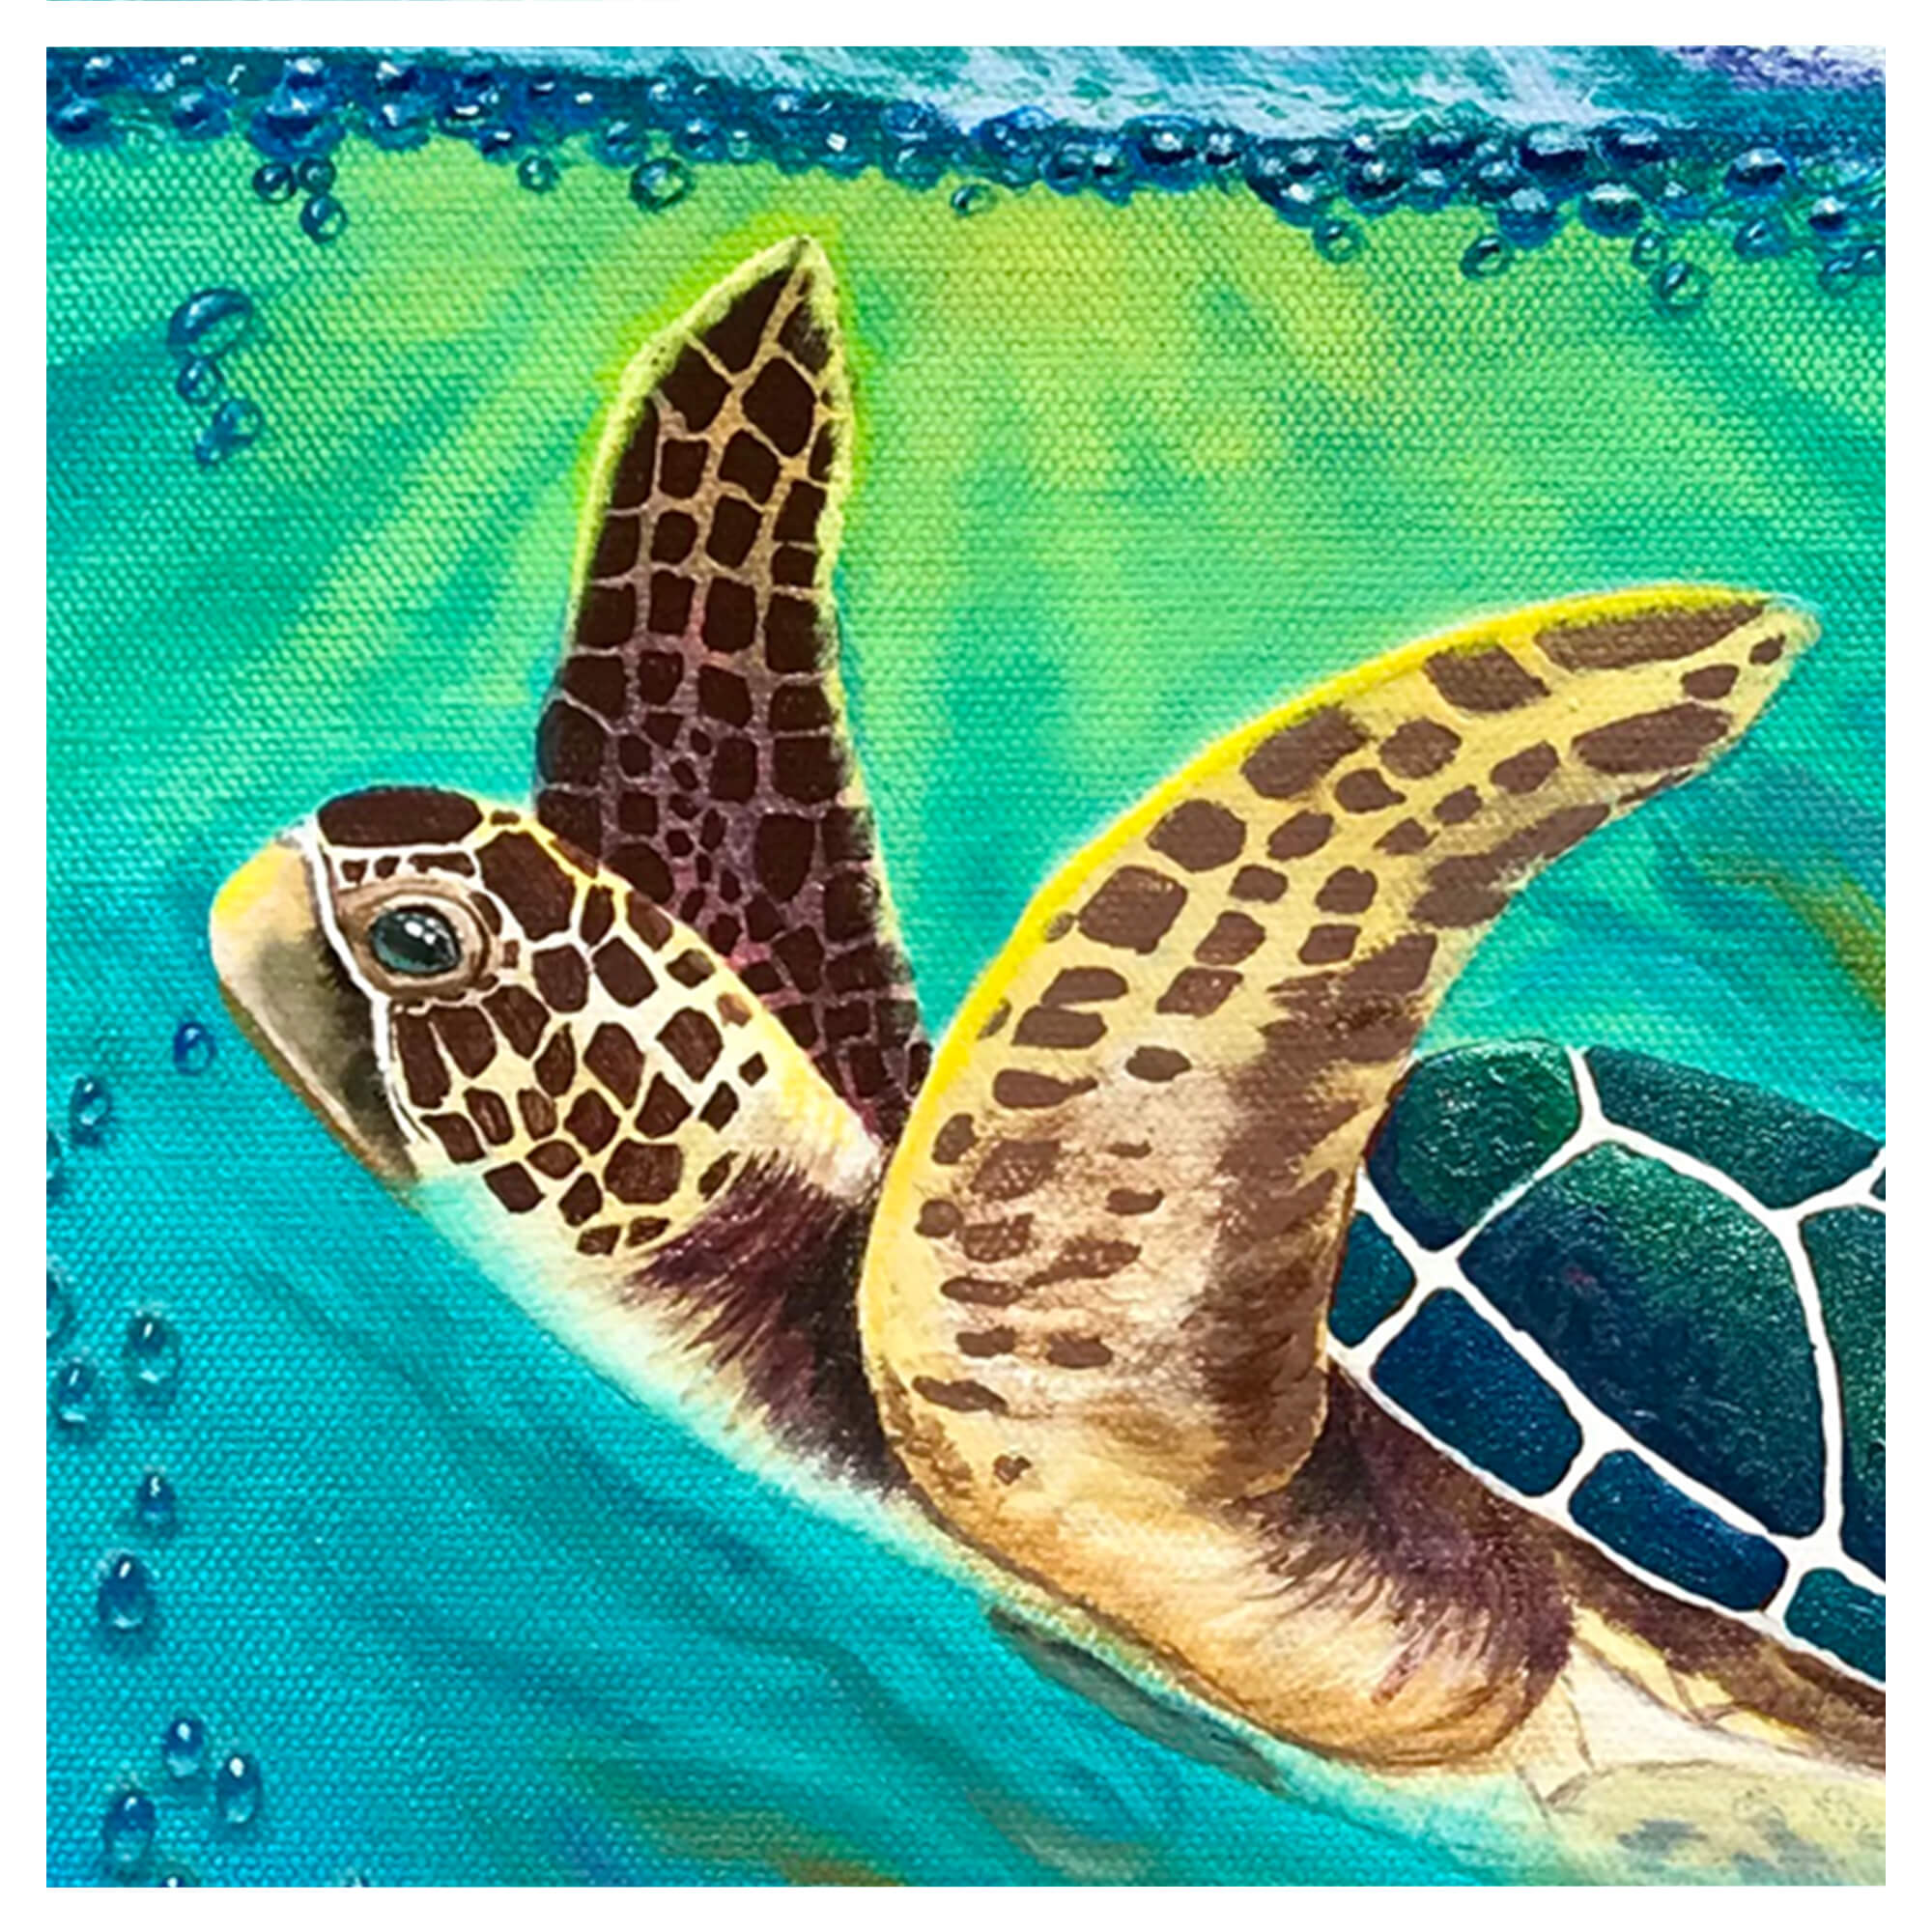 An illustration featuring a turtle by hawaii artist Galina Lintz